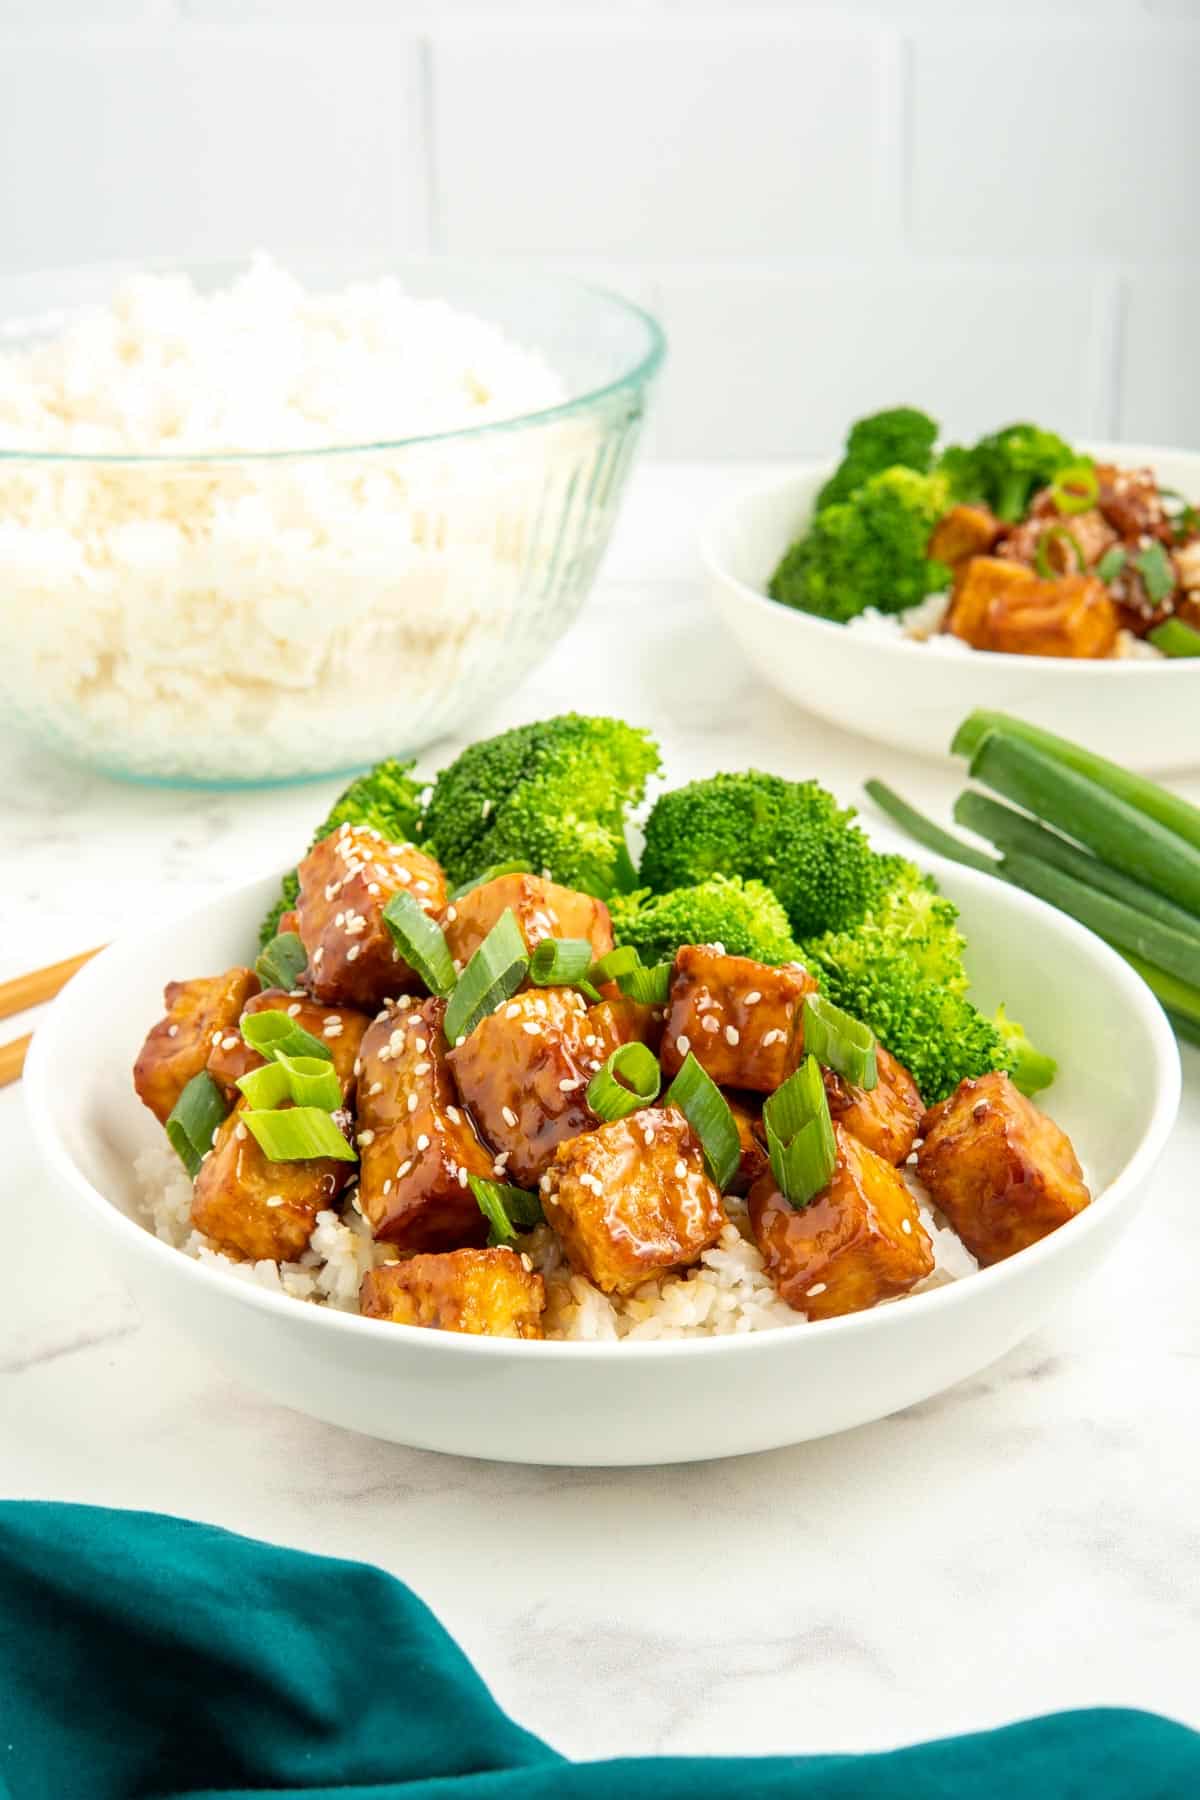 Sticky tofu served in a white bowl with rice and broccoli.